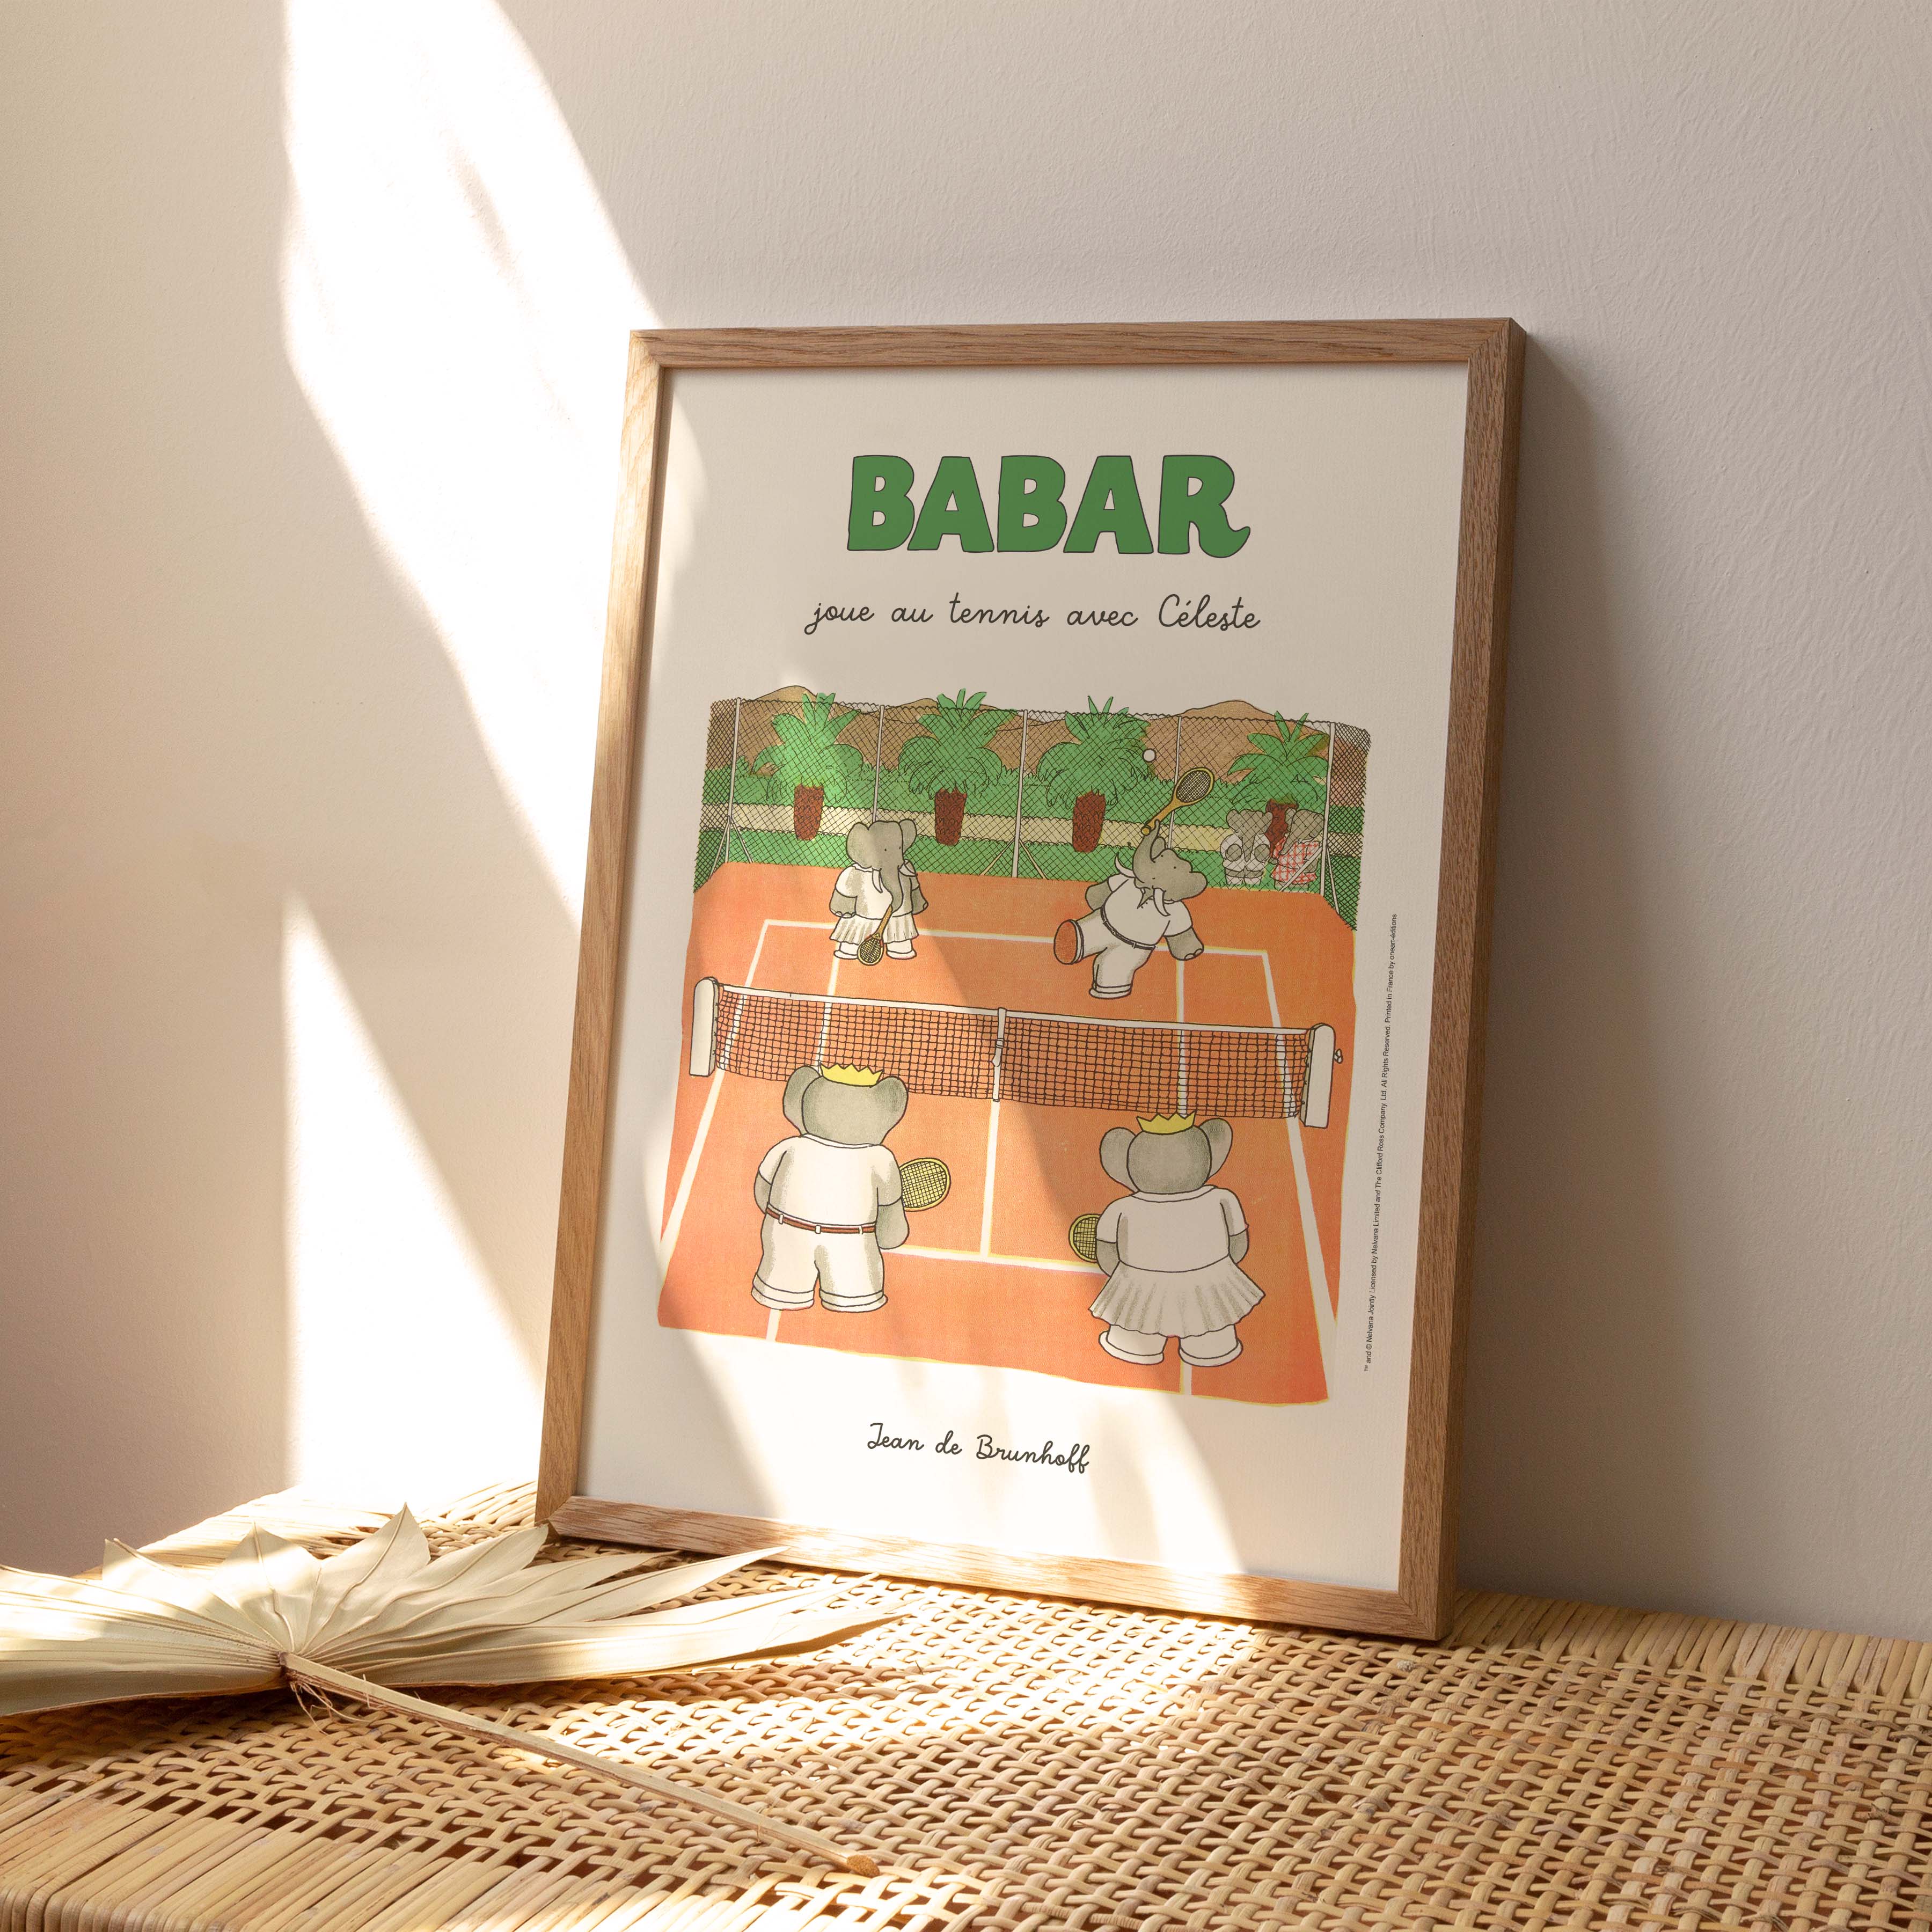 Poster Babar plays tennis with Céleste